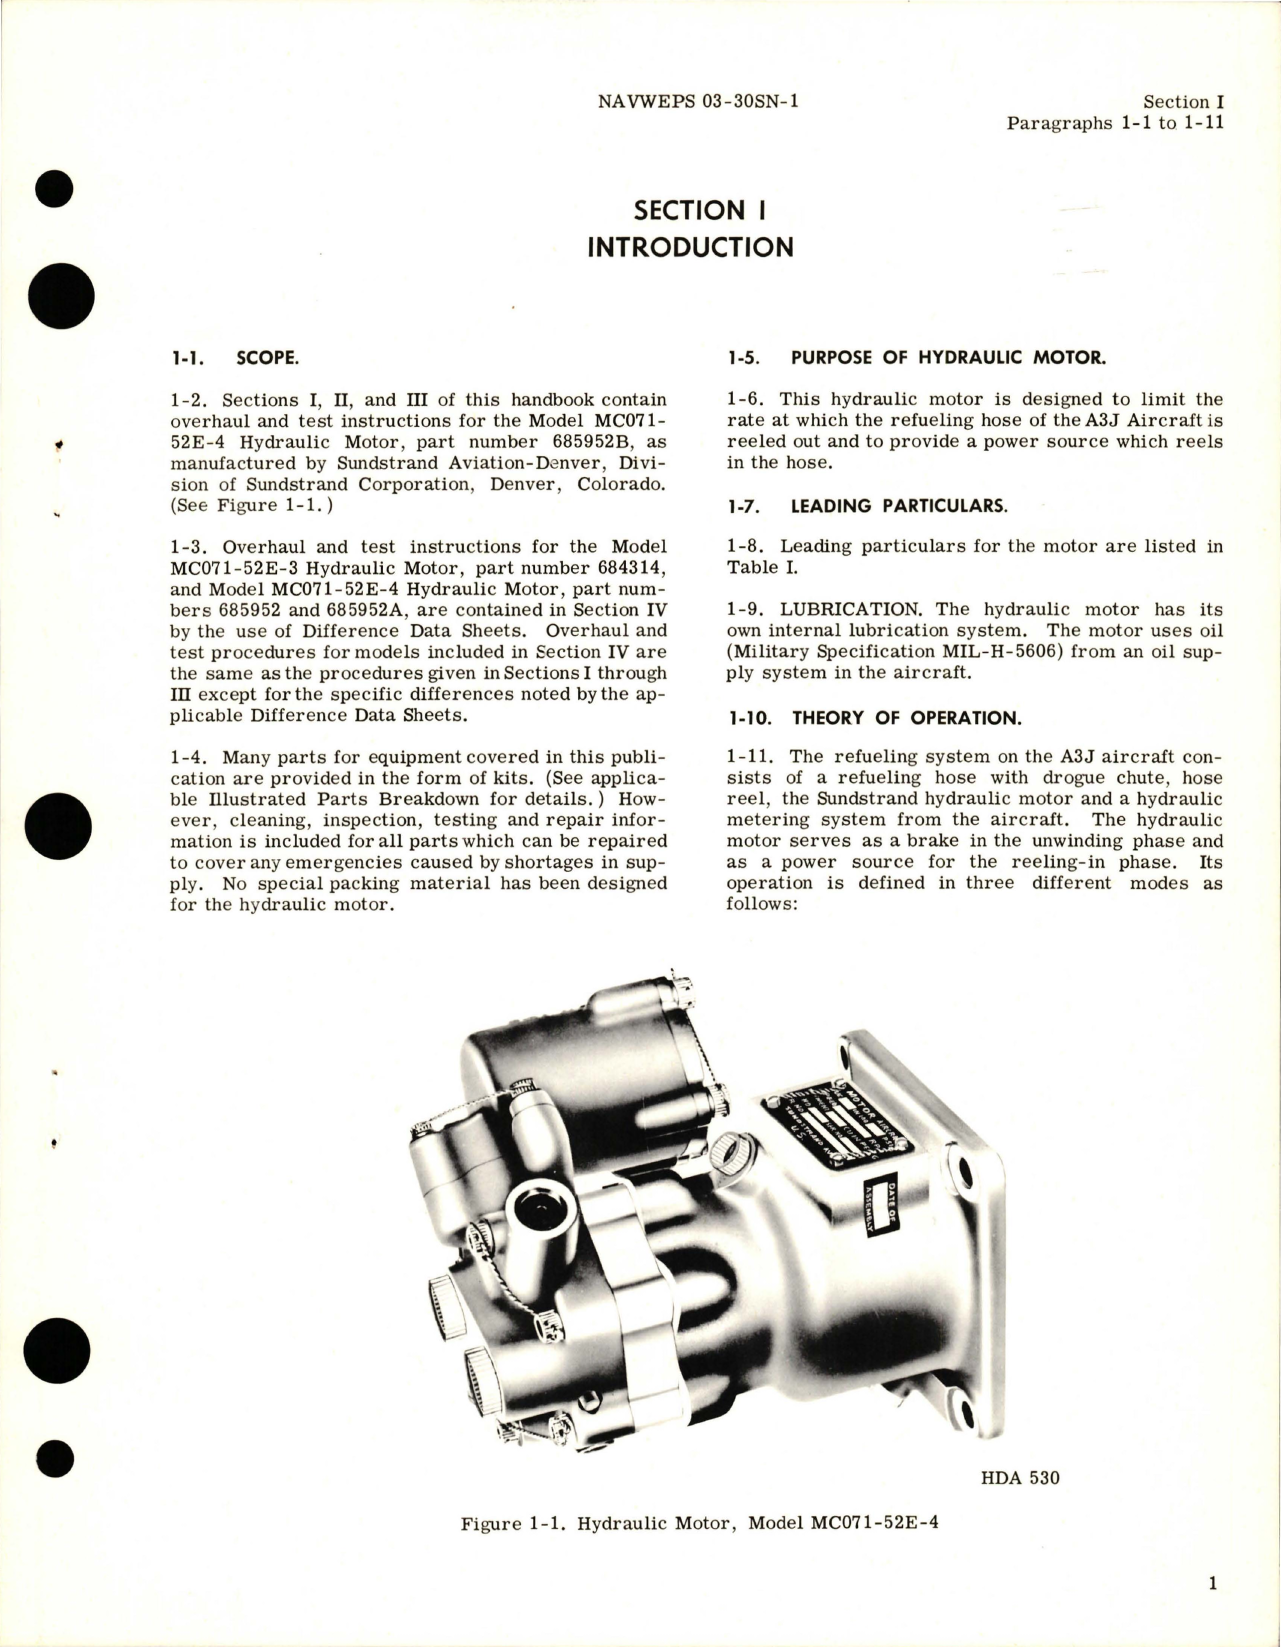 Sample page 5 from AirCorps Library document: Overhaul Instructions for Hydraulic Motor - Parts 684314, 685952, 685952A, and 685952B